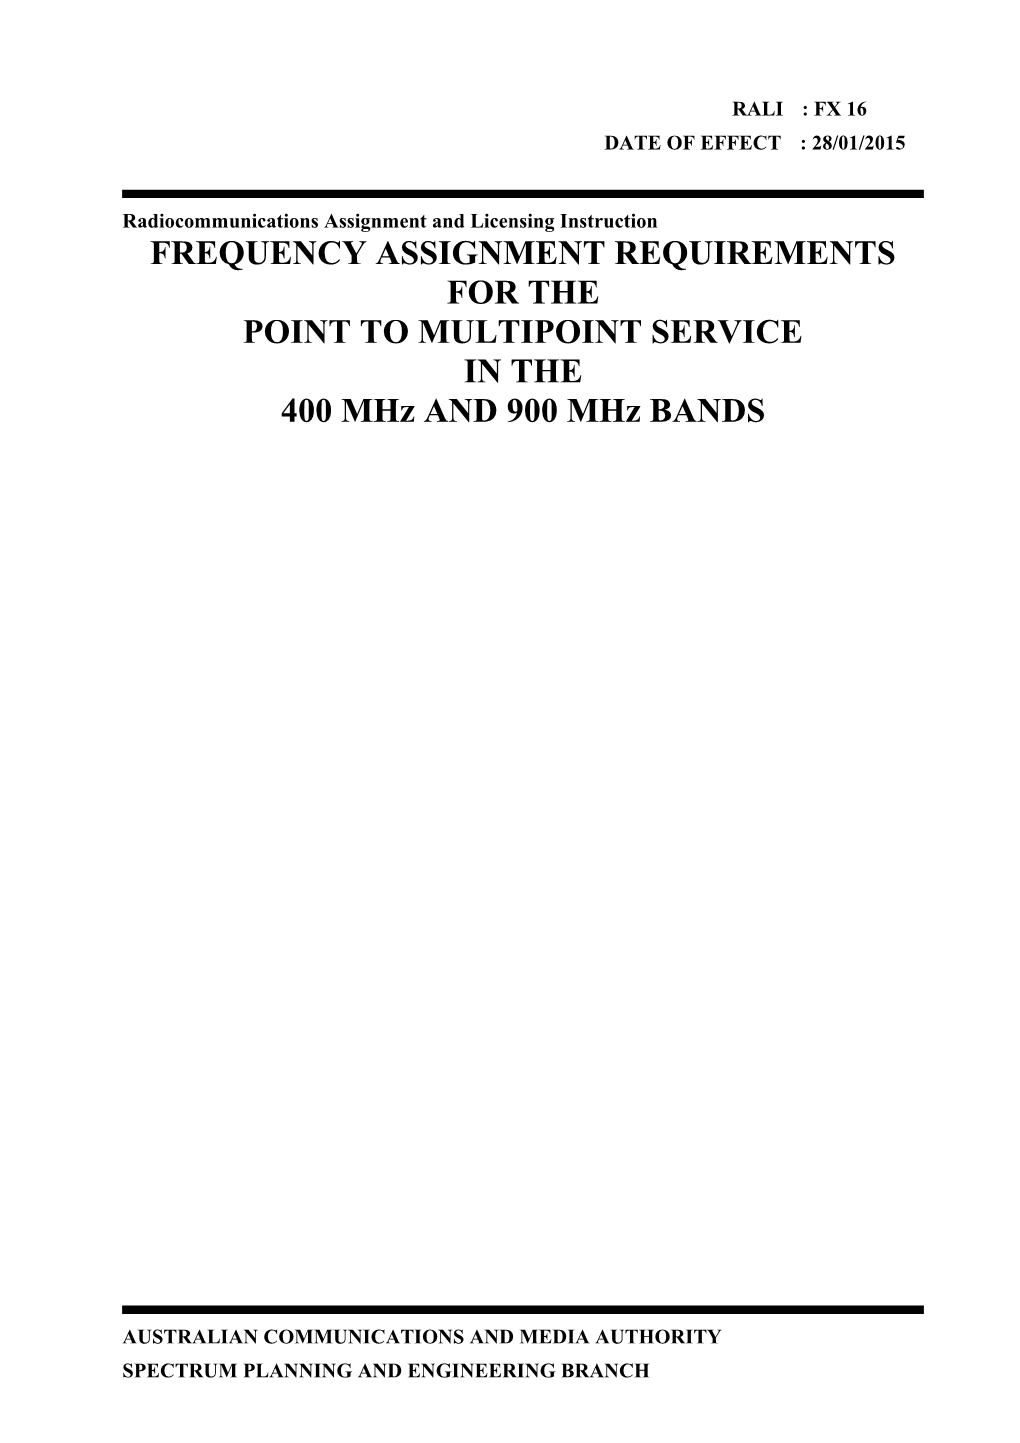 Radiocommunications Assignment and Licensing Instructions